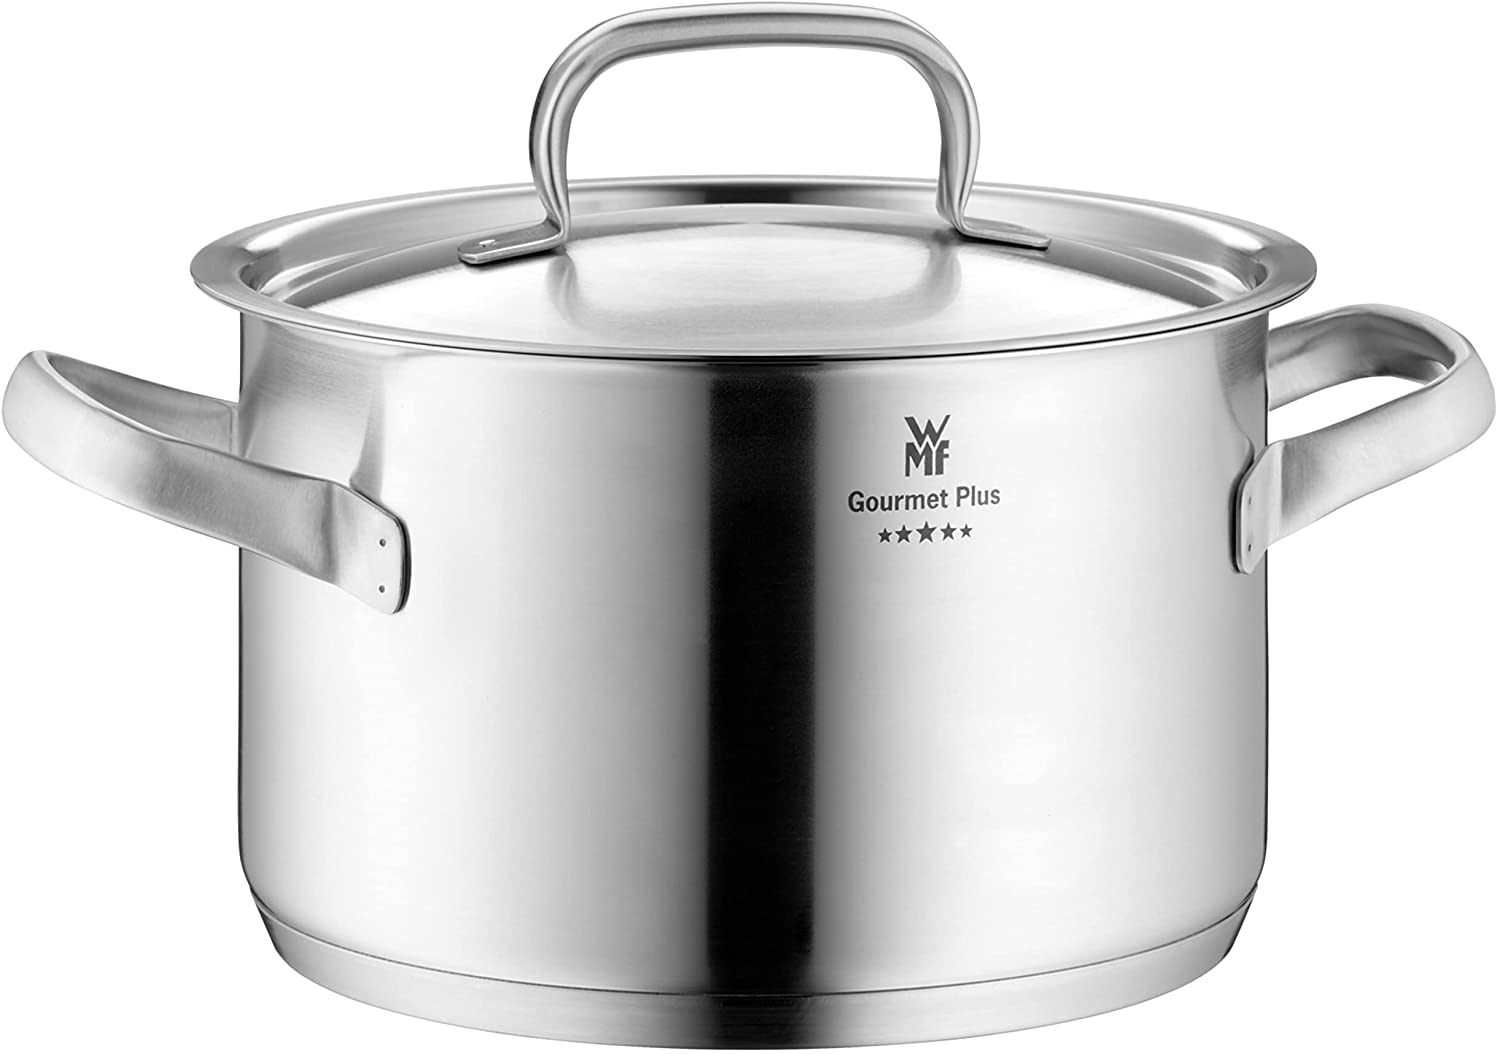 WMF cookware Ø 24 cm approx. 5,7l Gourmet Plus Inside scaling vapor hole hollow side handles metal lid Cromargan stainless steel suitable for all stove tops including induction dishwasher-safe